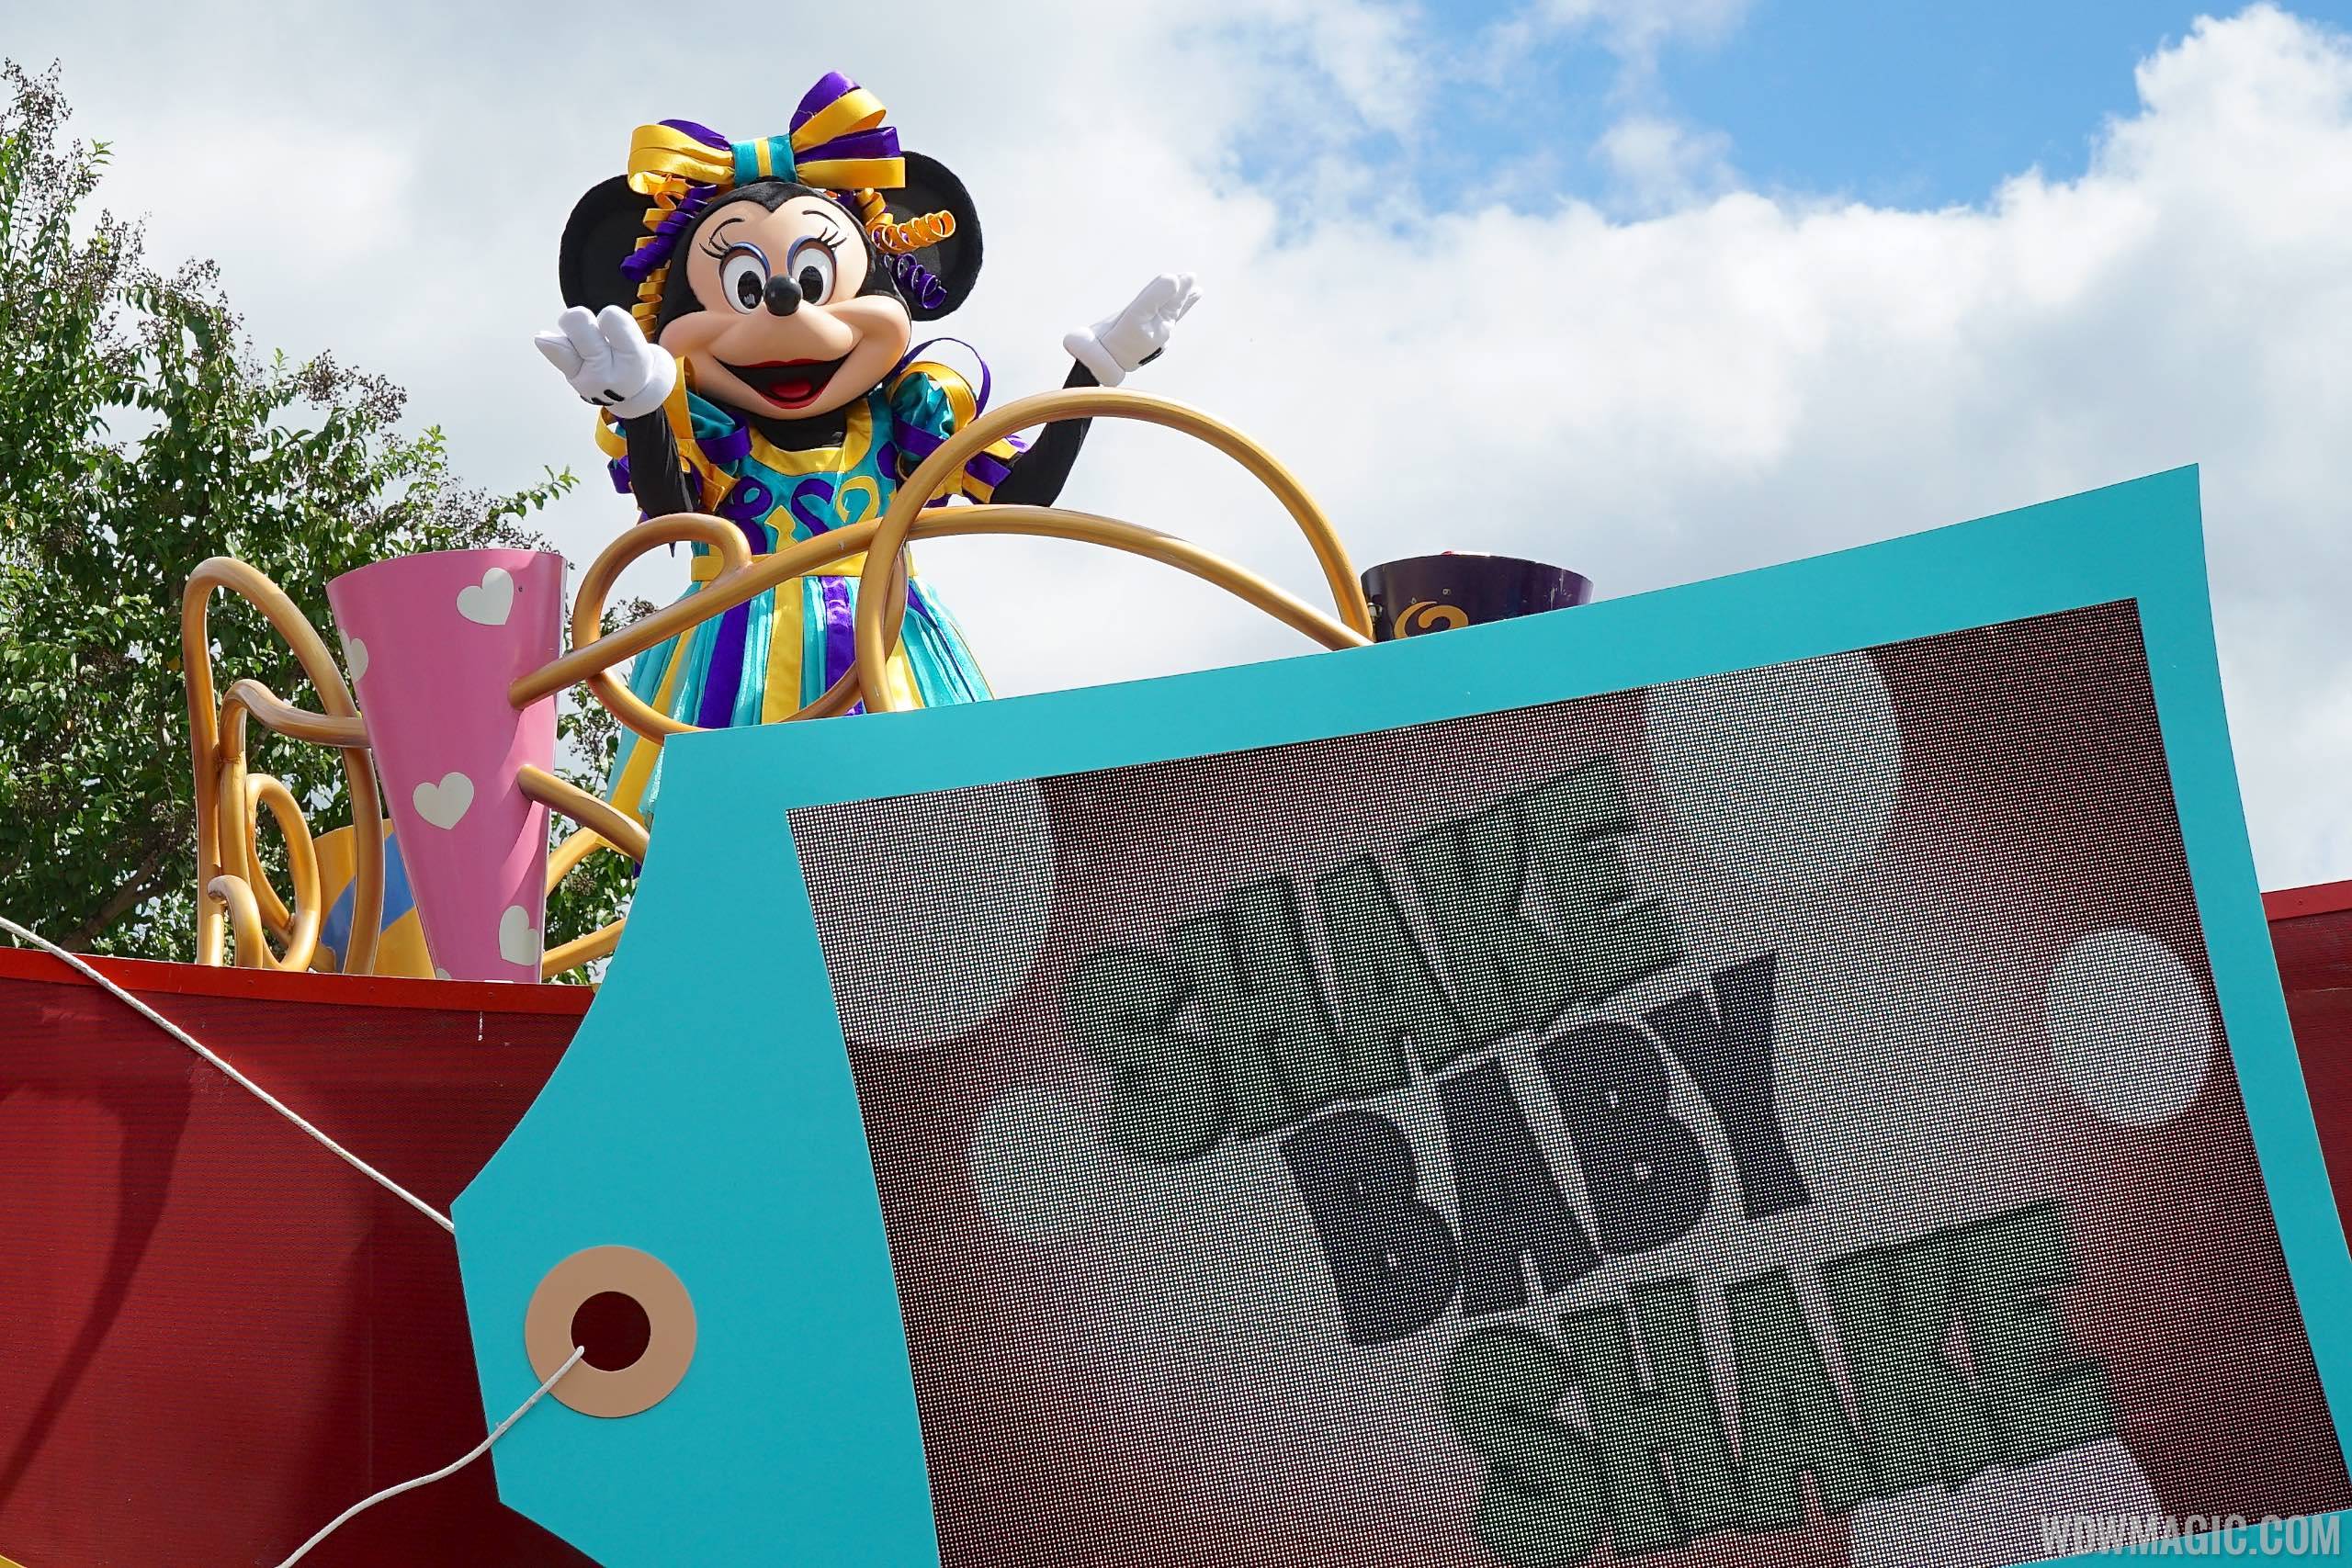 Move it! Shake It! Dance and Play It! Street Party coming to and end later this year